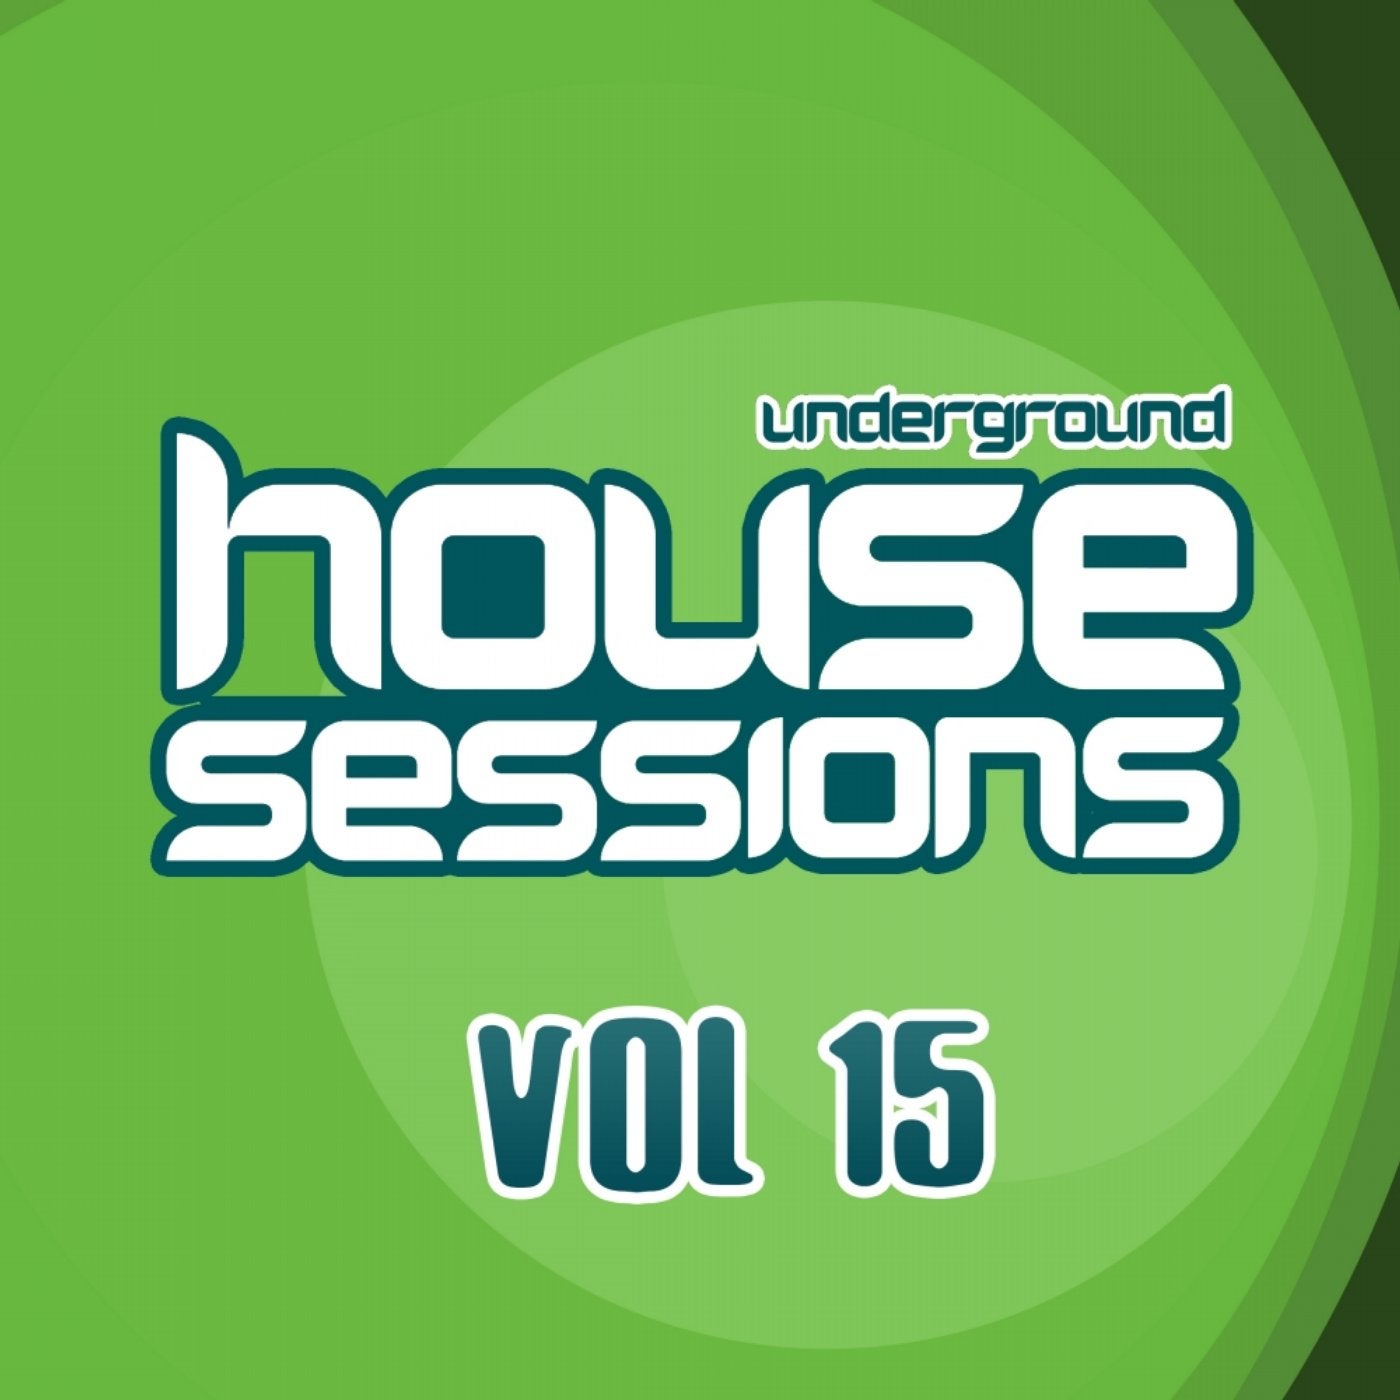 Underground House Sessions Vol. 15